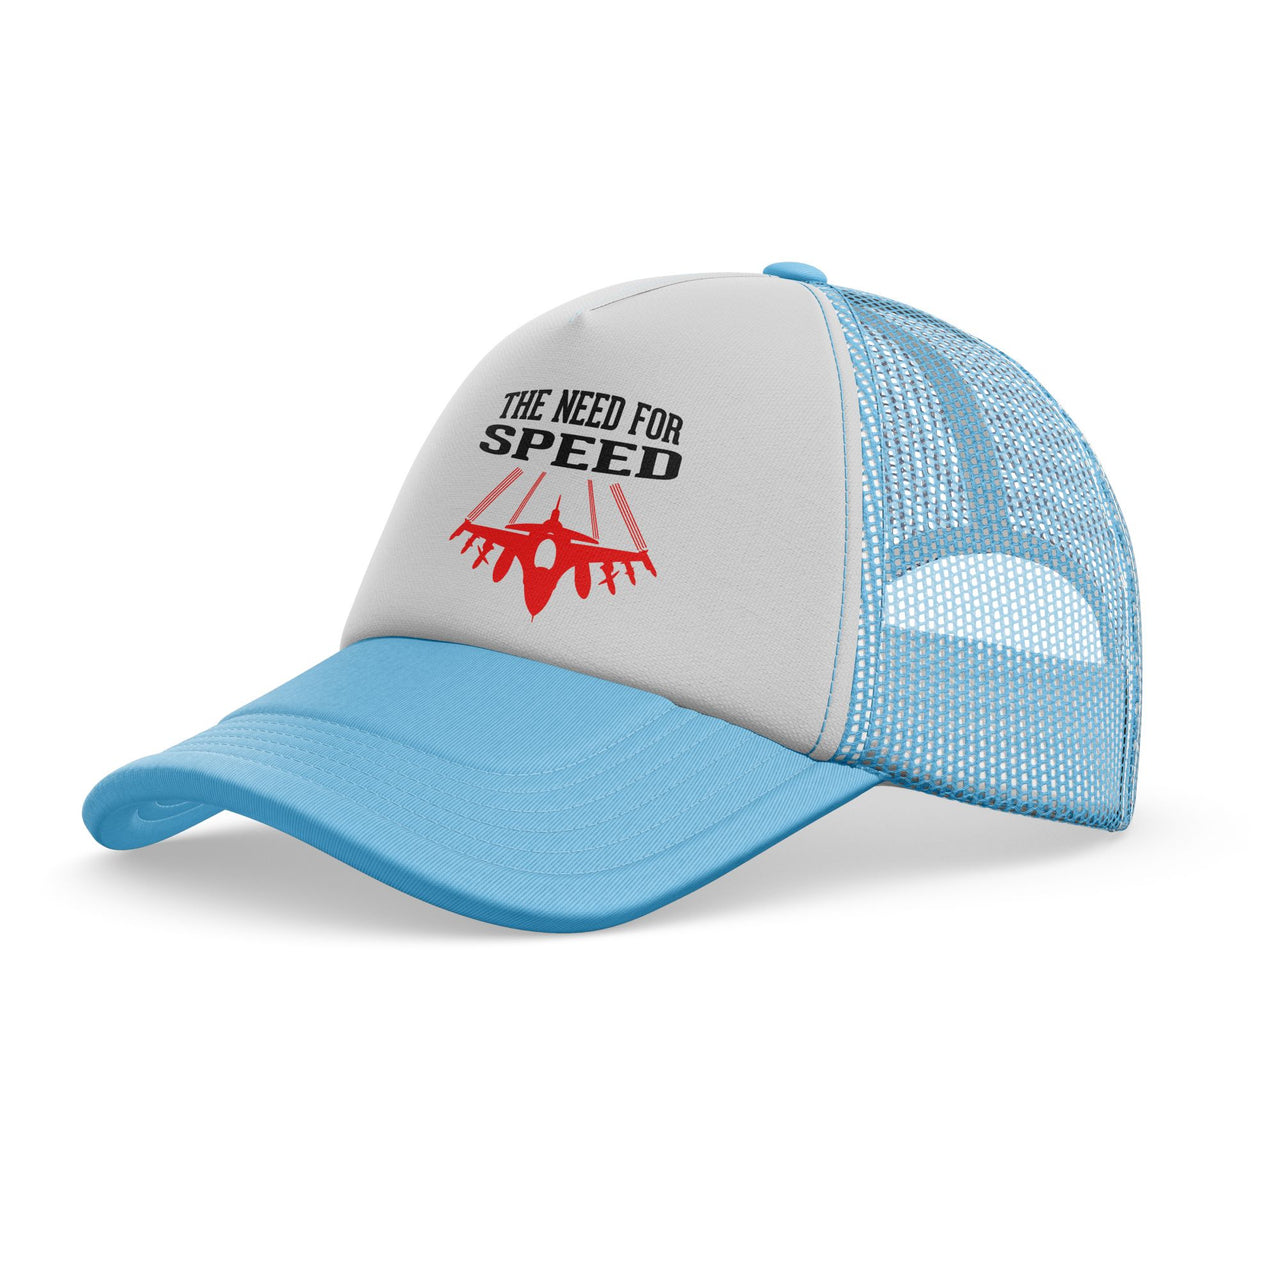 The Need For Speed Designed Trucker Caps & Hats